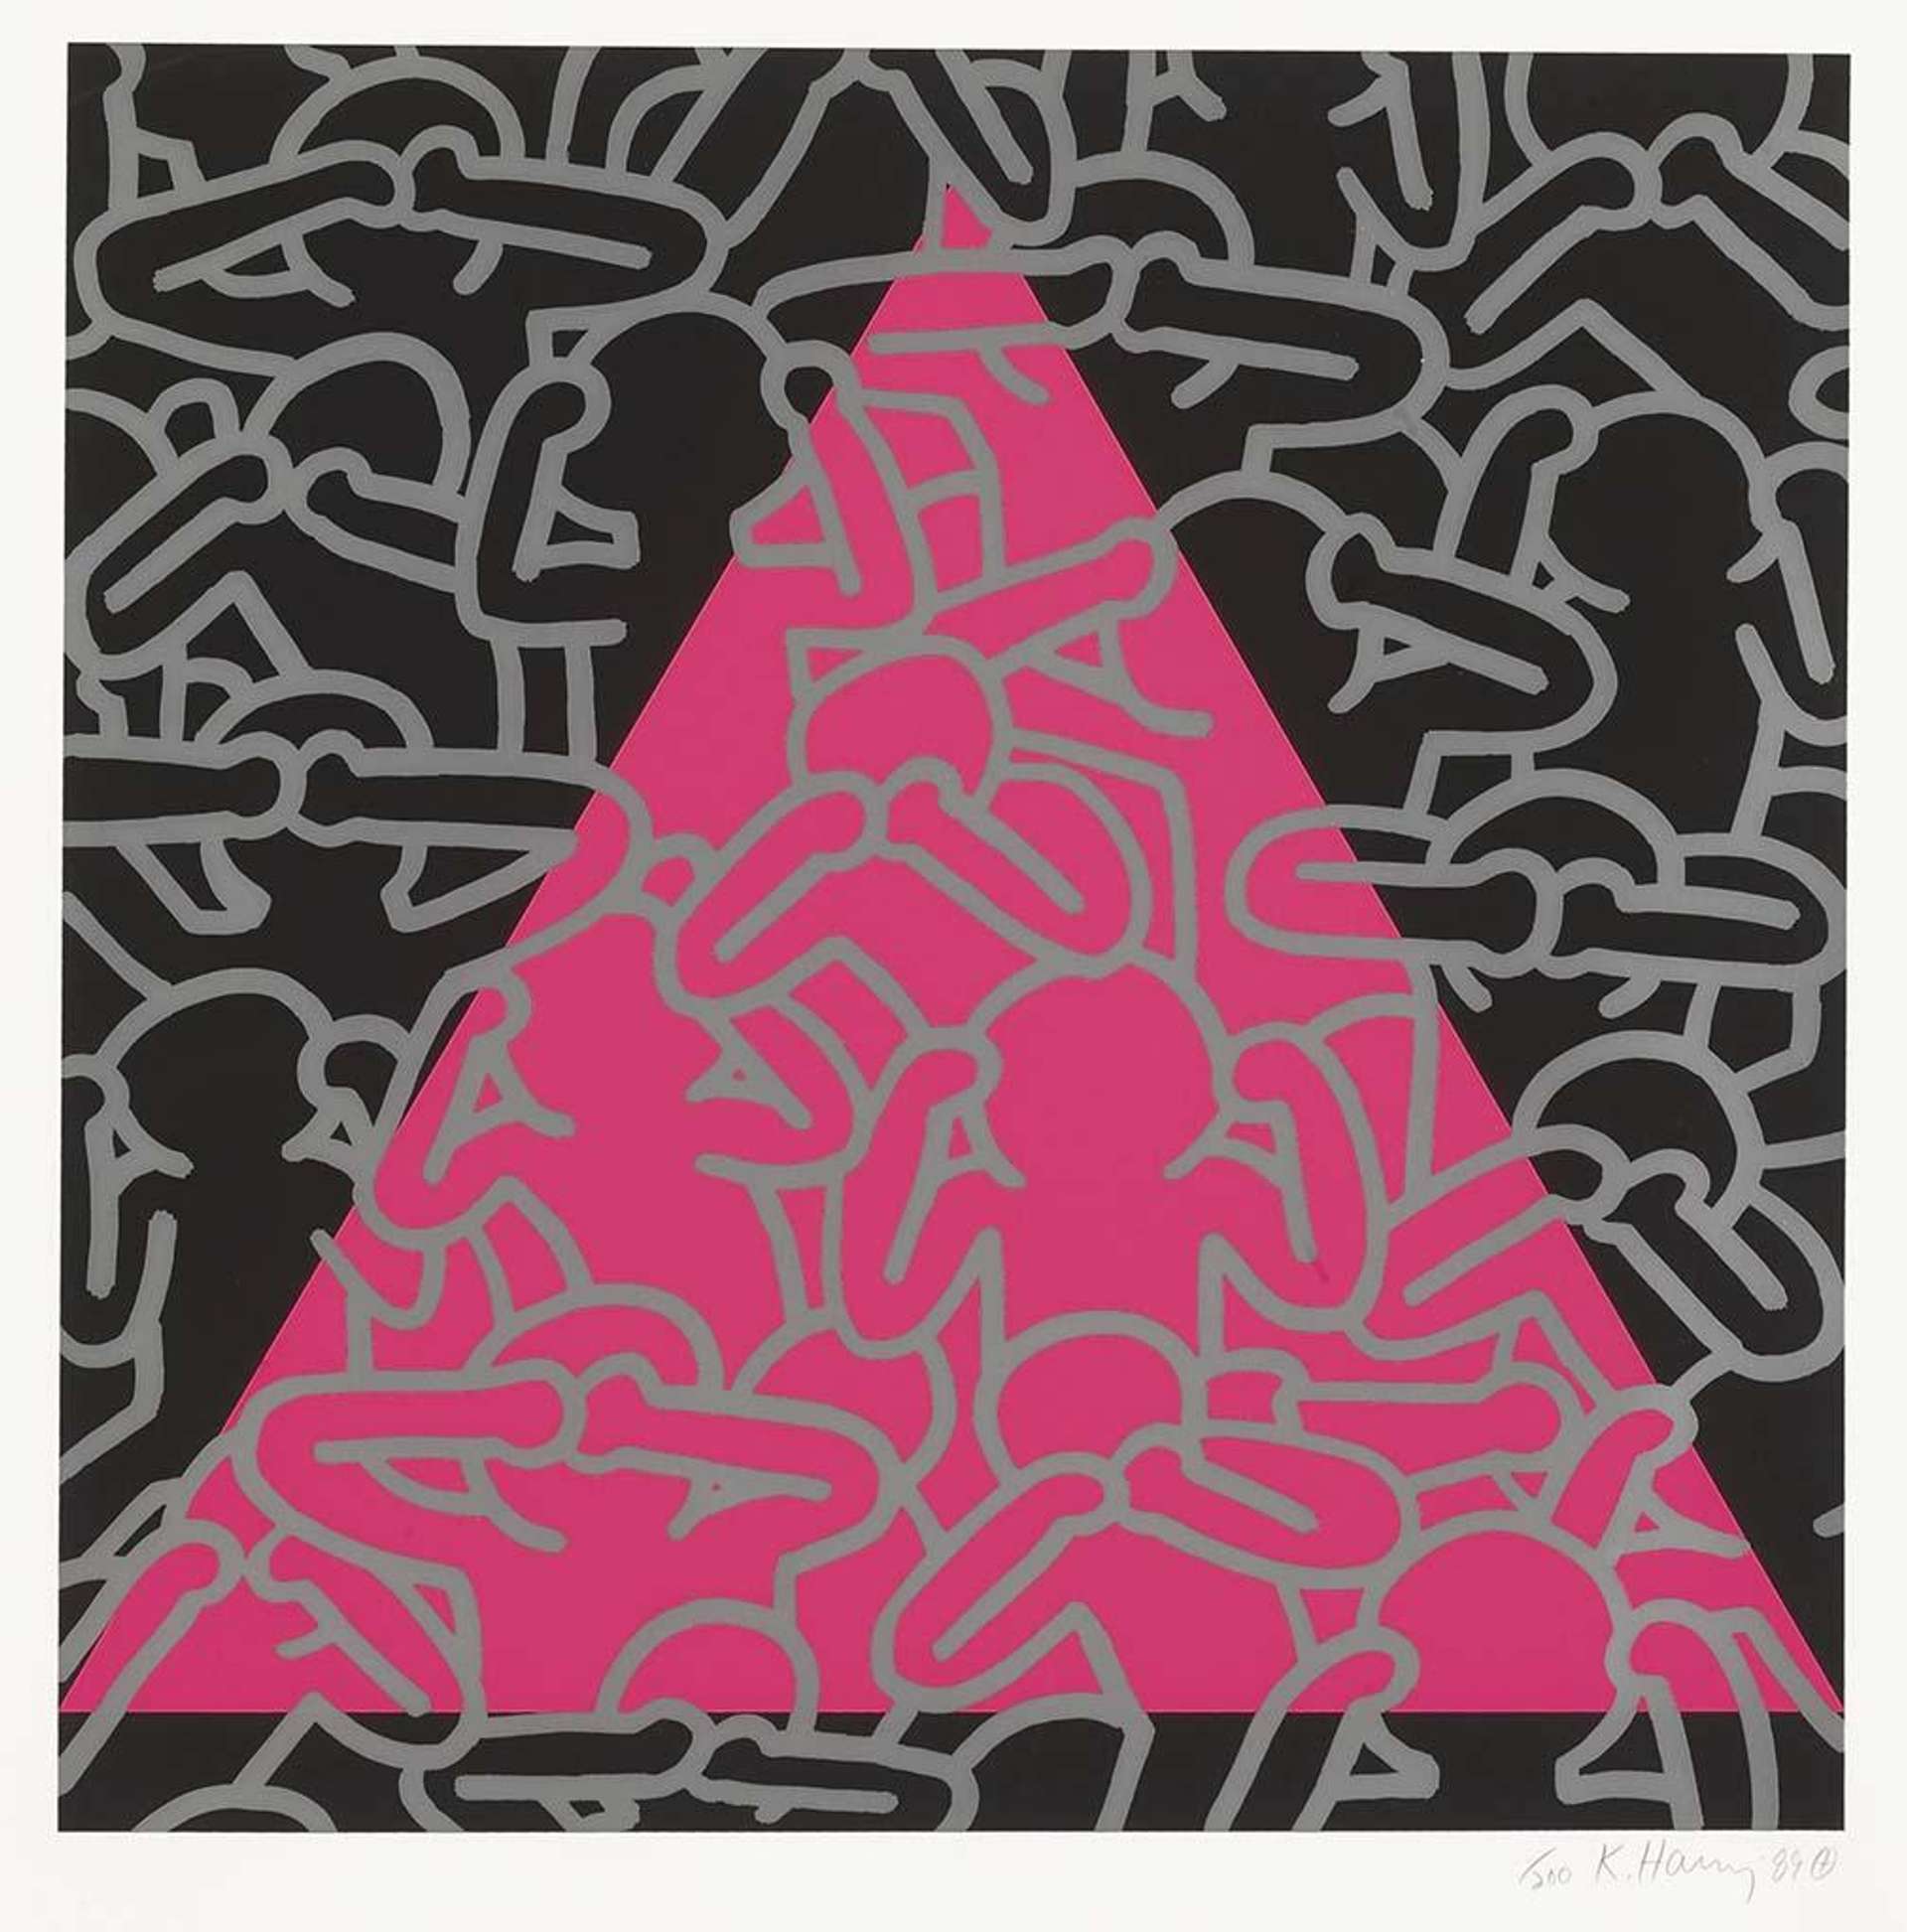 Keith Haring’s Silence = Death. A pink triangle against a black background with white outlines of figures covering their eyes, ears, and mouths.